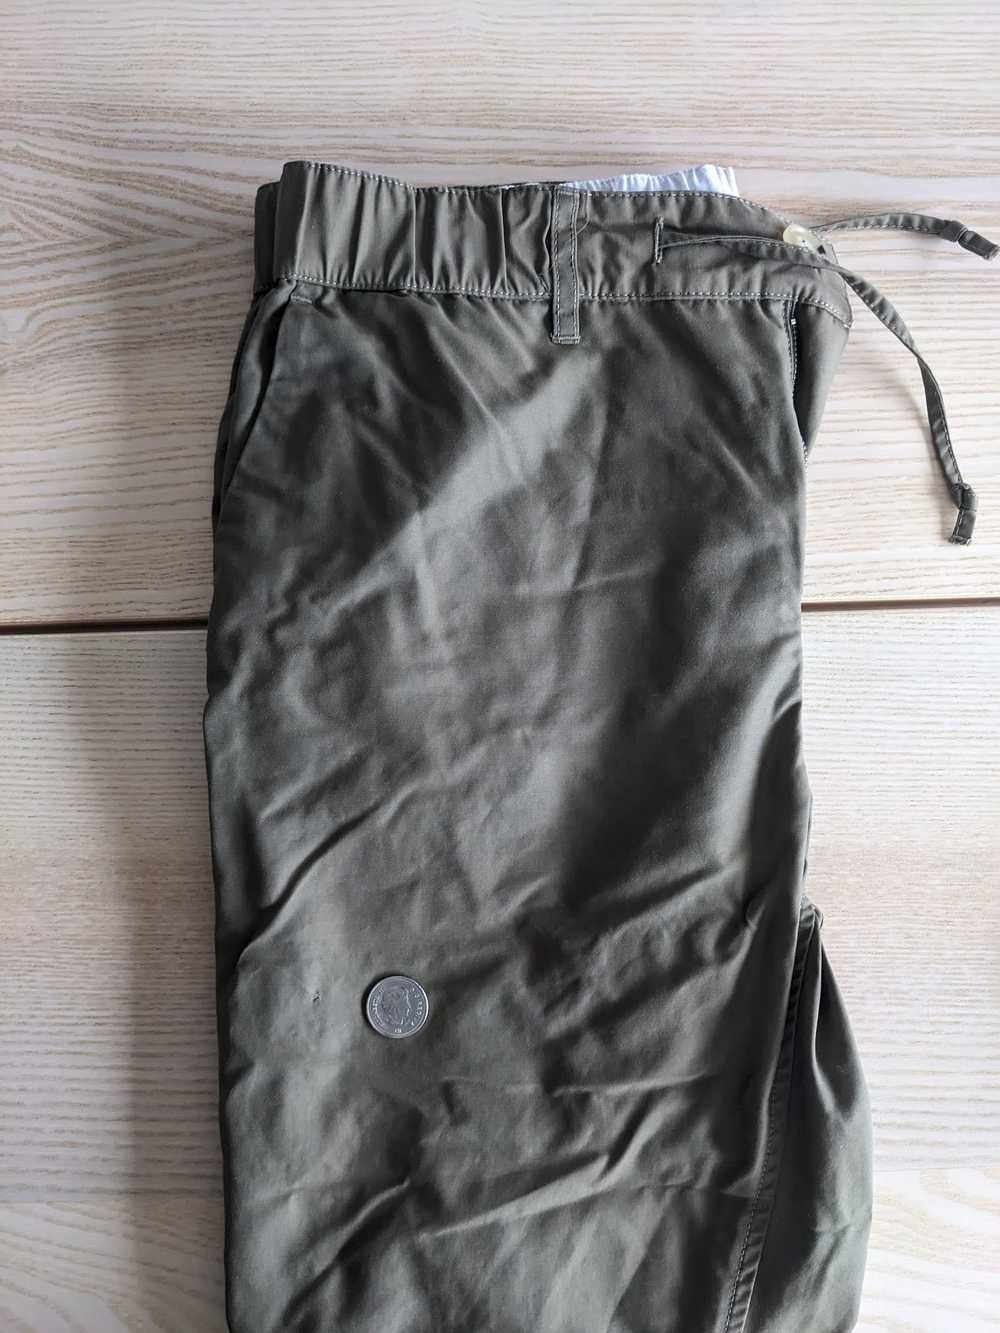 Kestin Hare Olive Water Repellent Pants - image 7